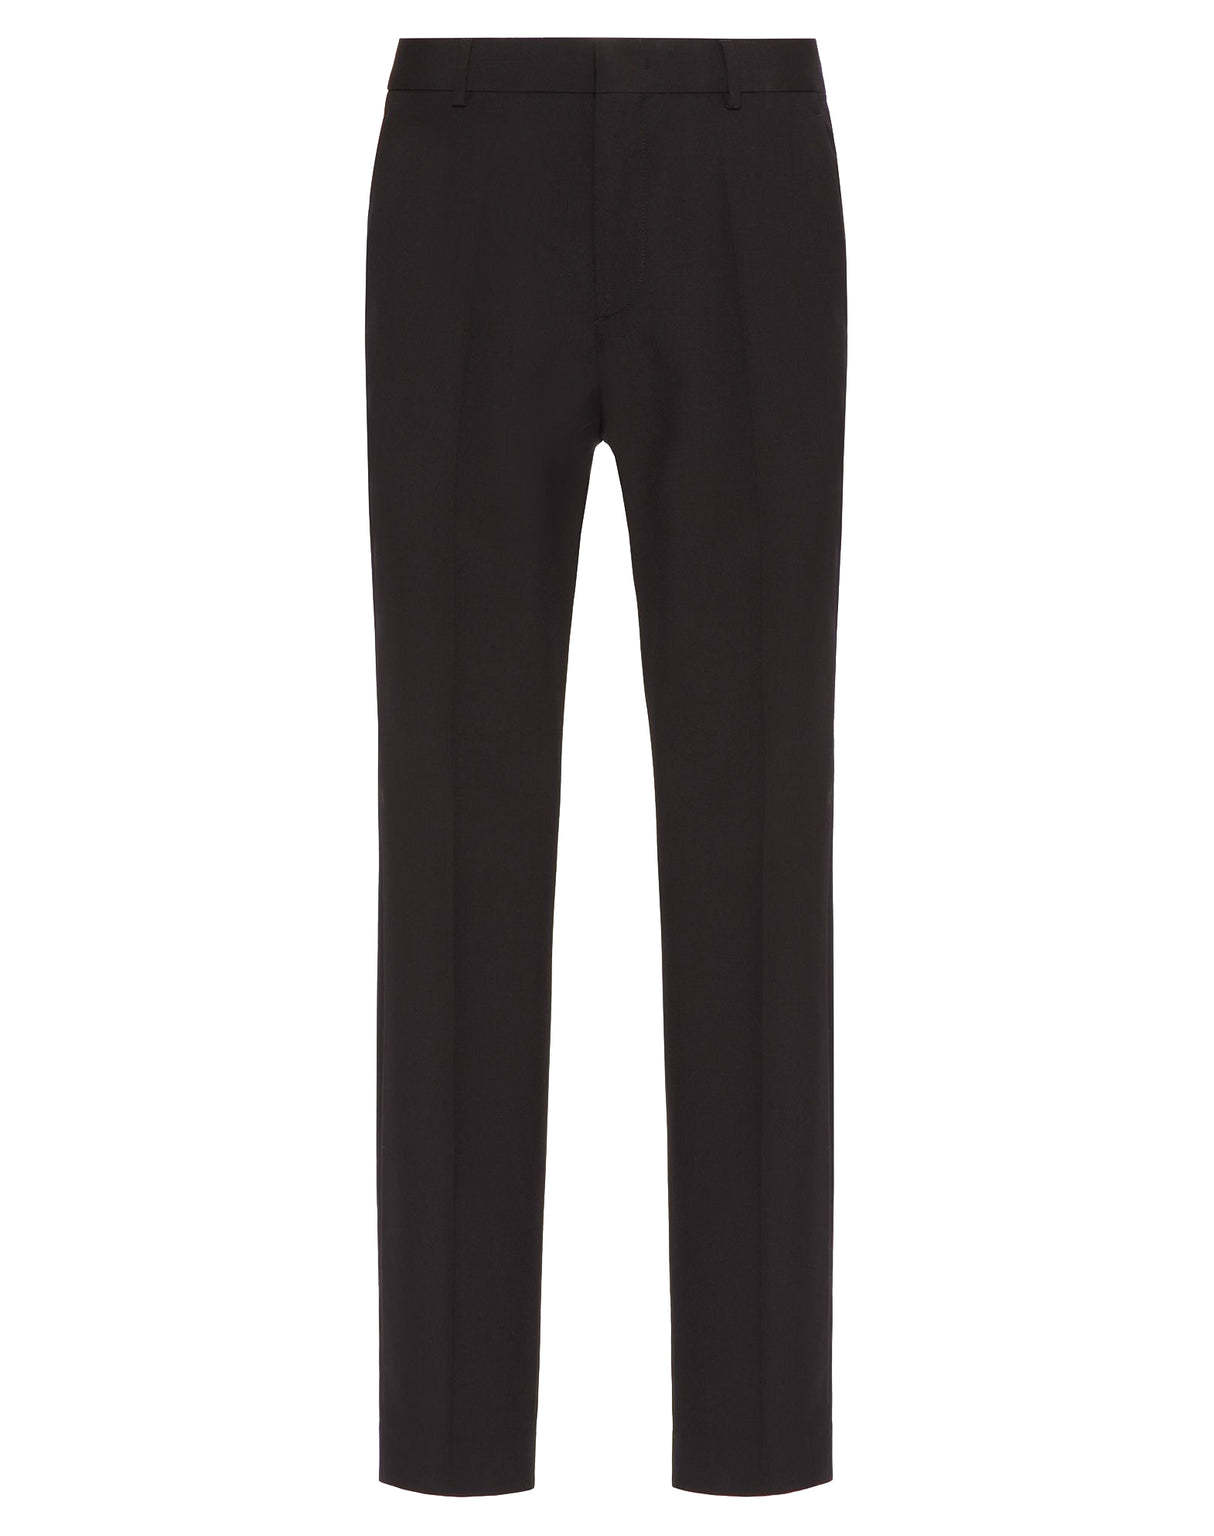 VALENTINO Sophisticated Slim Trousers in Classic Black for Men